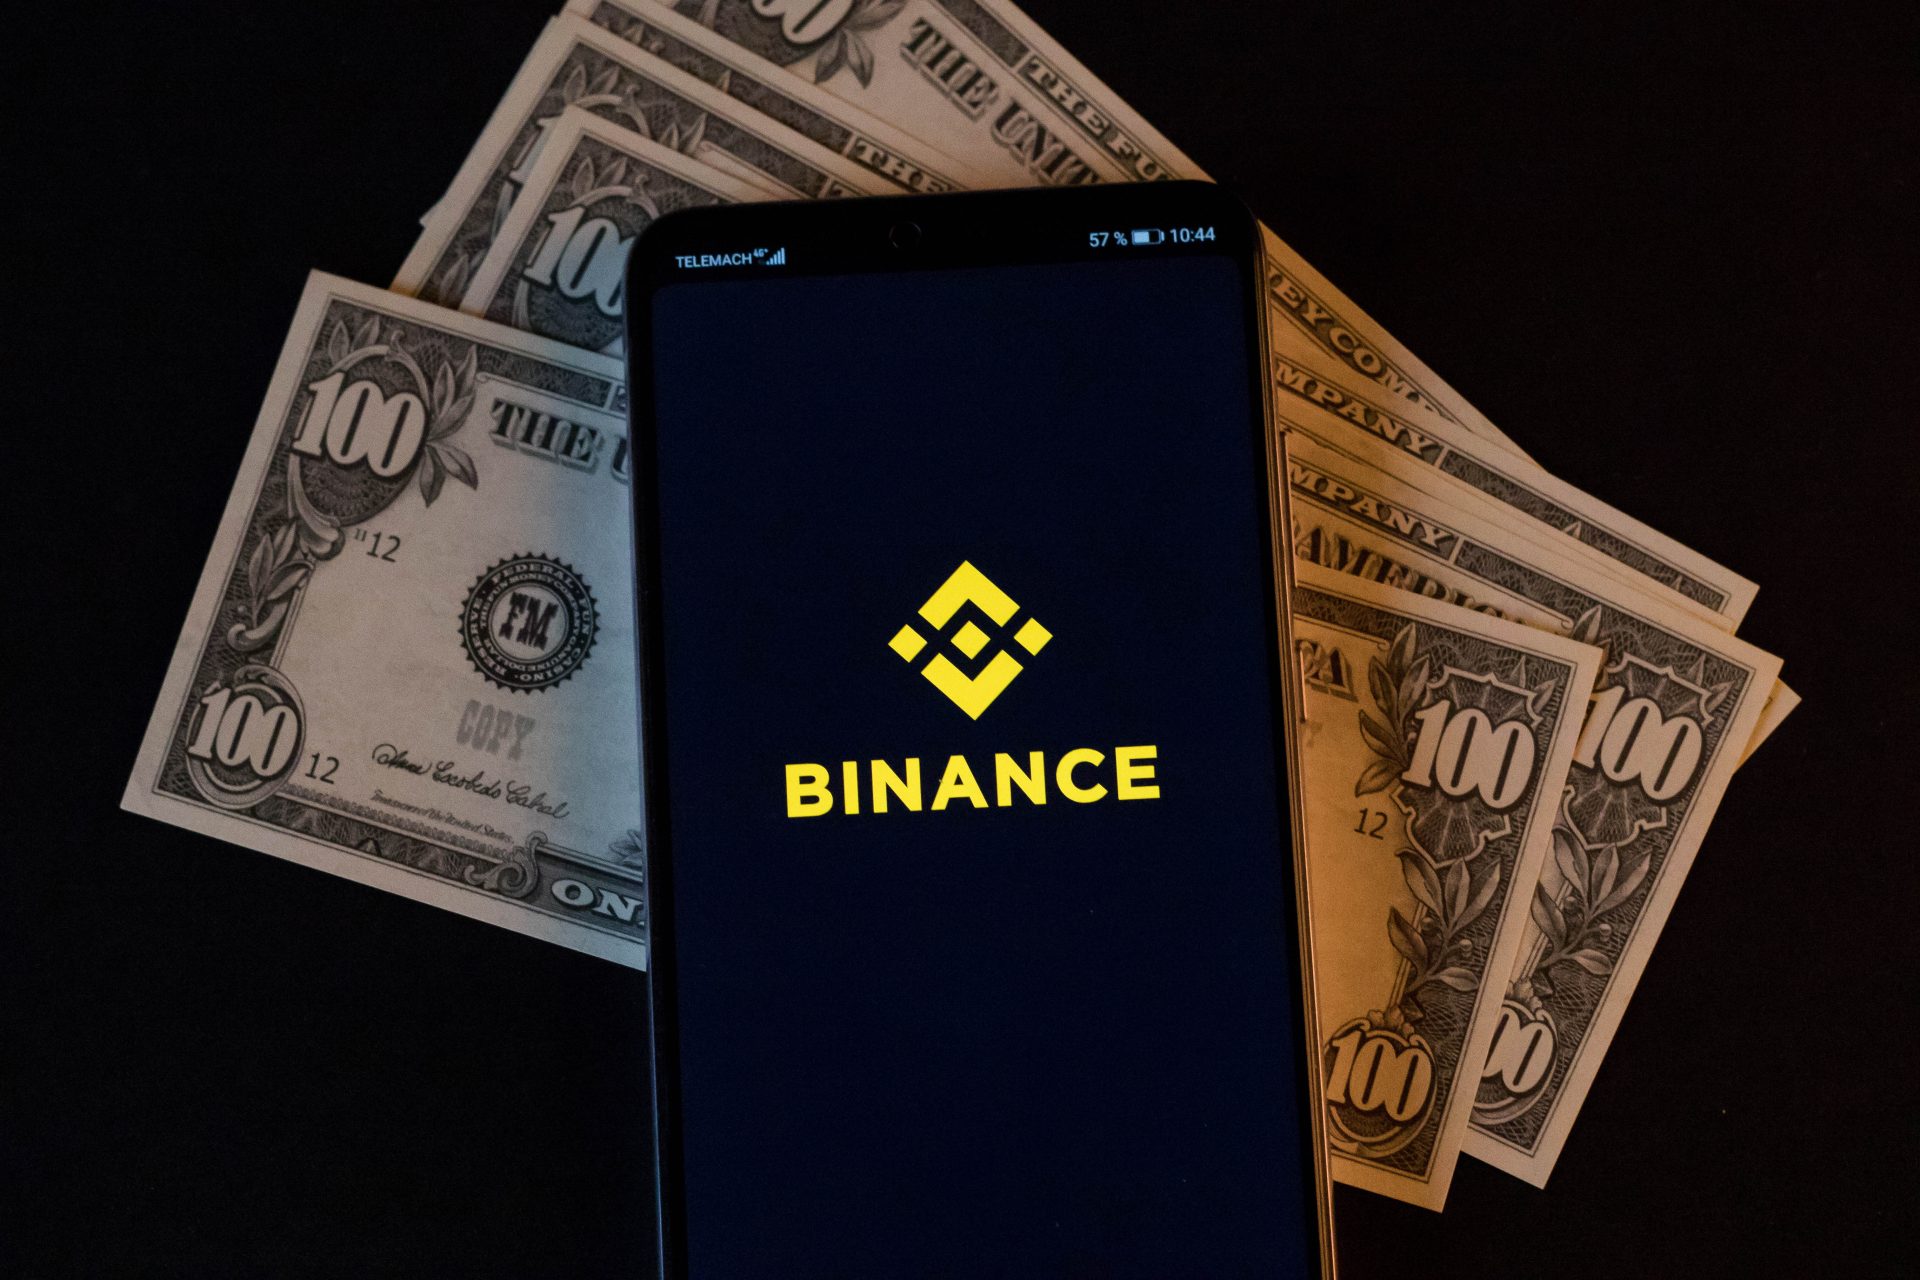 mobile-phone-and-binance-logo-on-dollars_cc-by-20